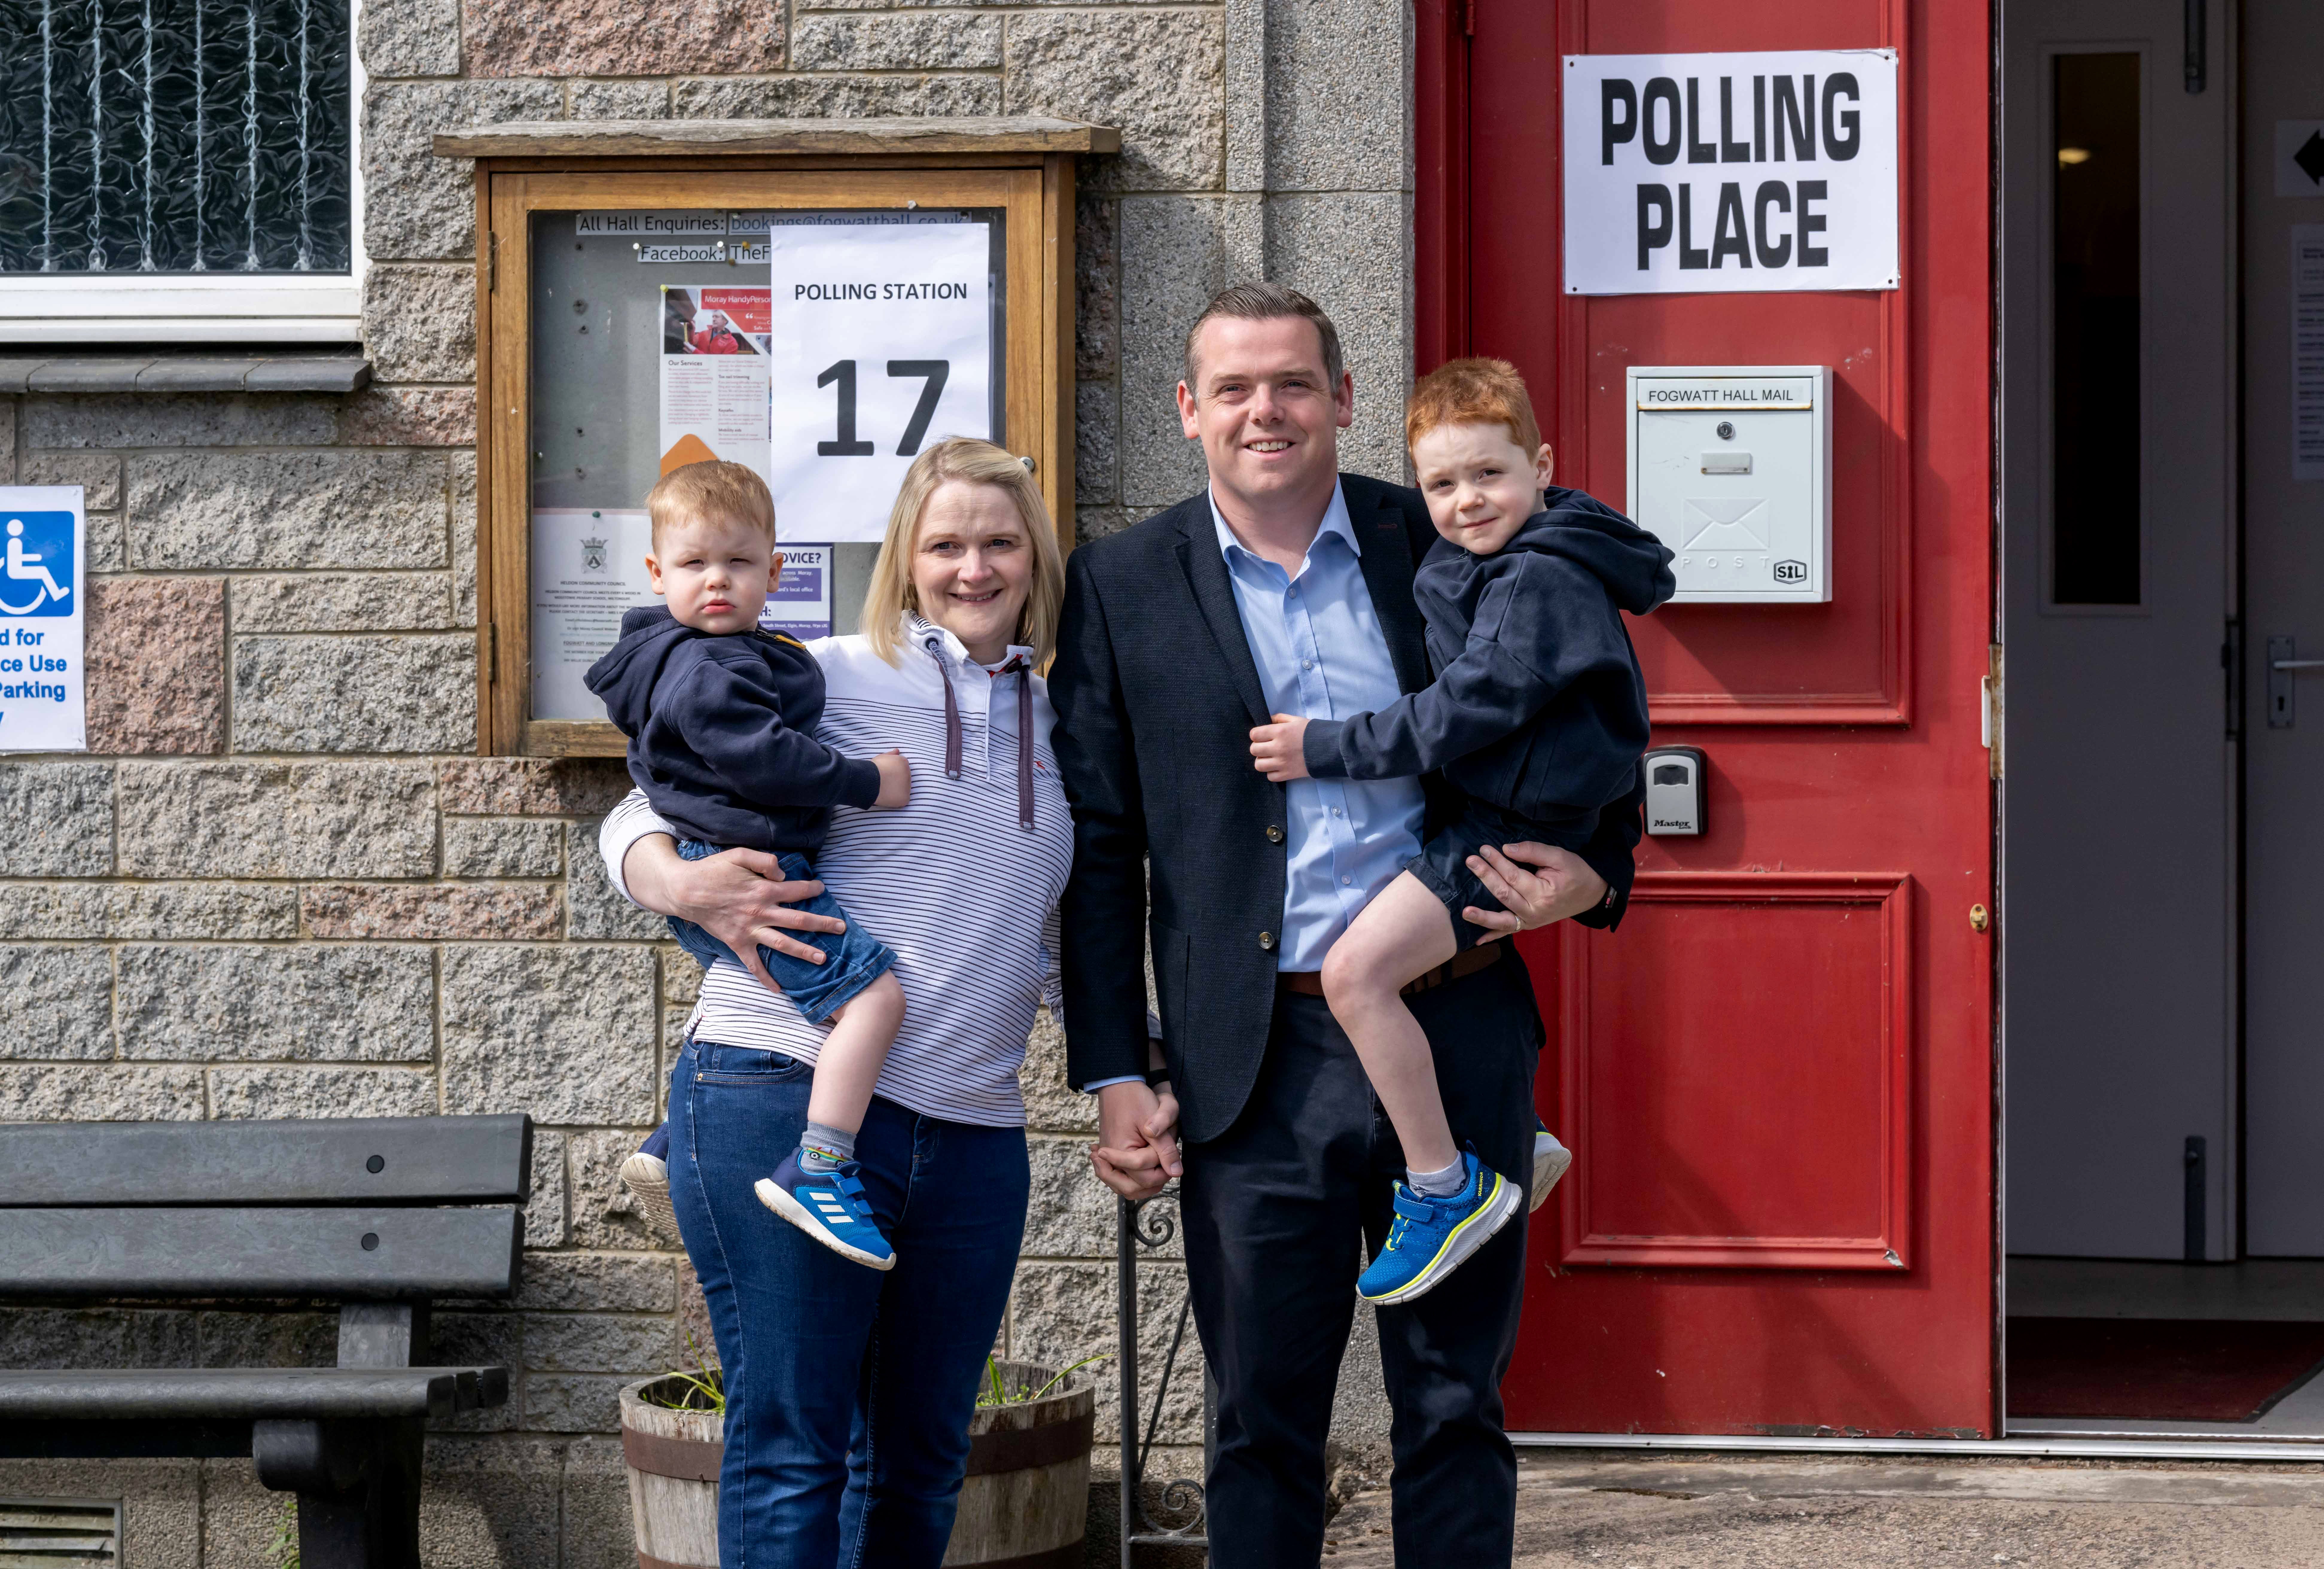 Scottish Conservative leader Douglas Ross arrived with his family to cast his vote (Michal Wachucik/PA)